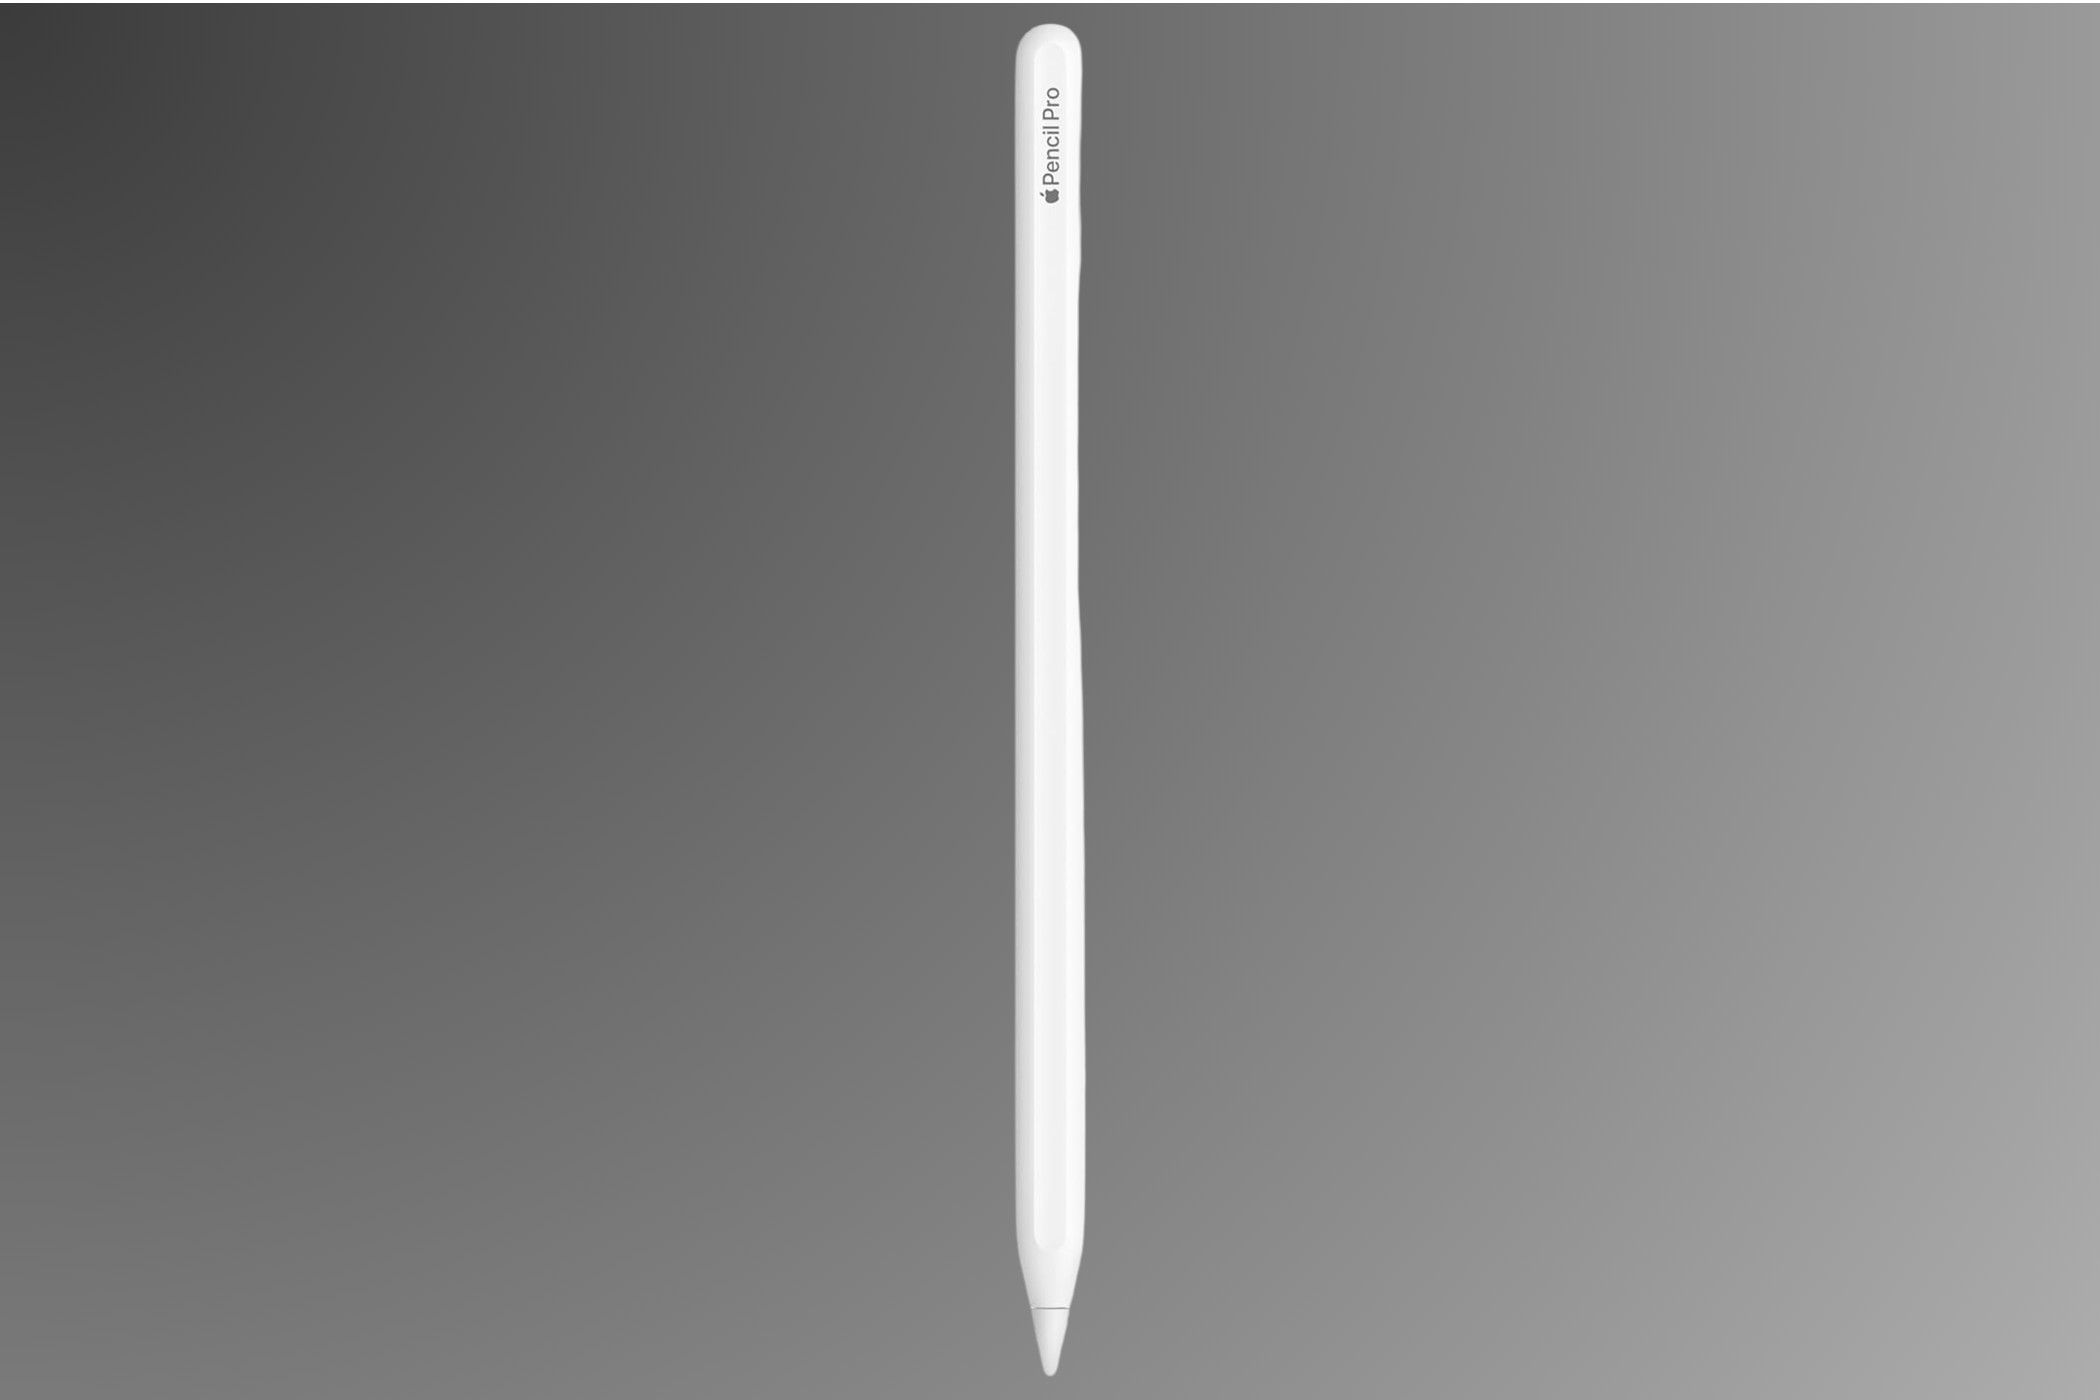 Apple Pencil Pro on a gradient background